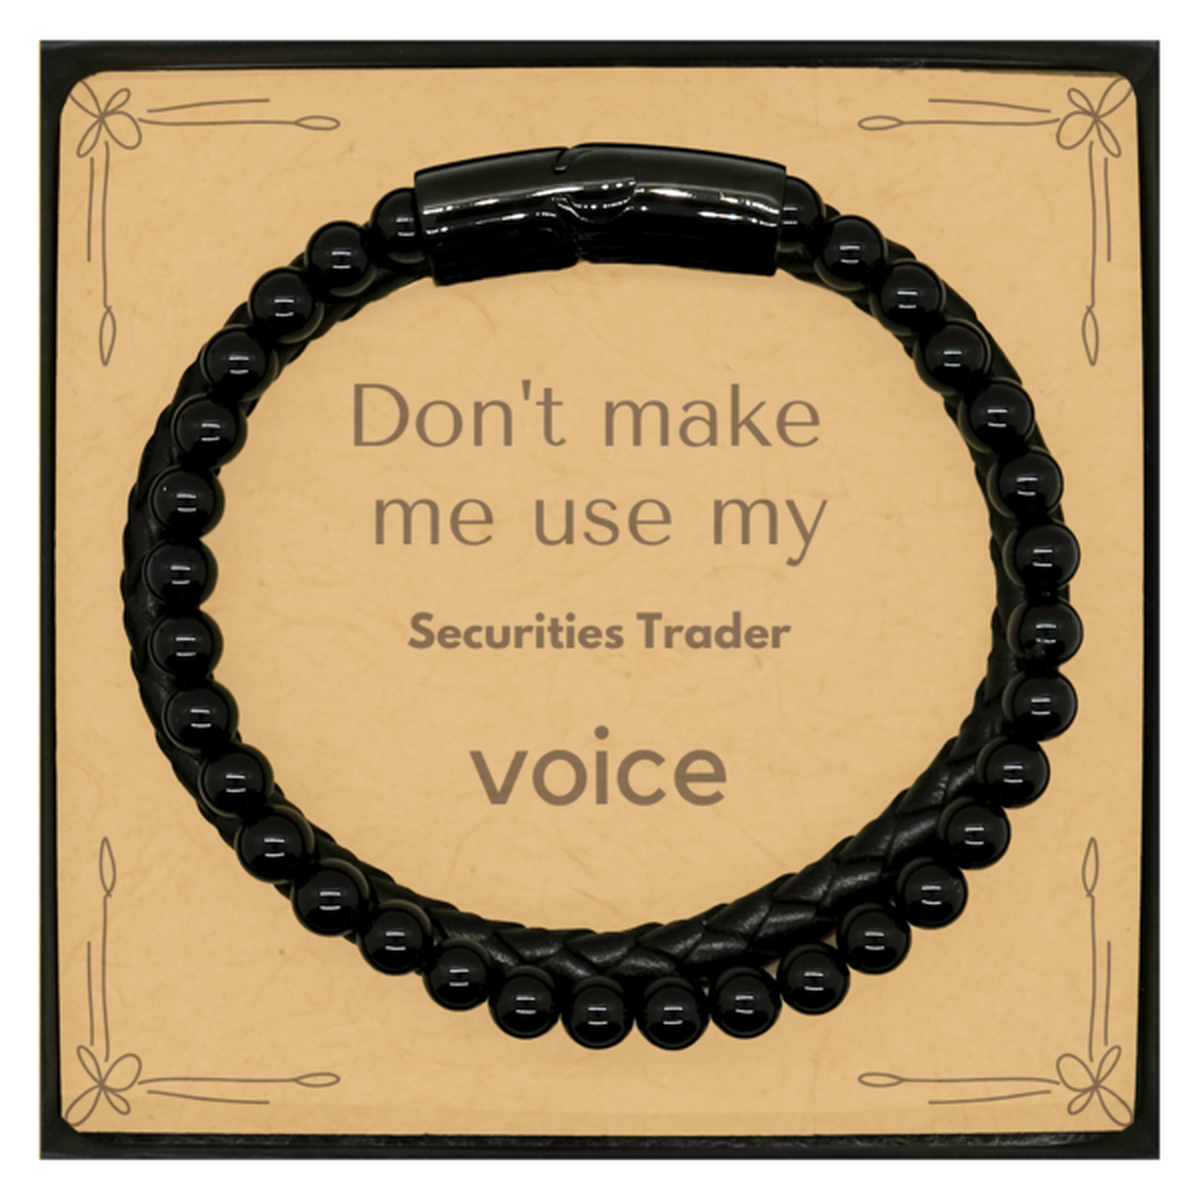 Don't make me use my Securities Trader voice, Sarcasm Securities Trader Card Gifts, Christmas Securities Trader Stone Leather Bracelets Birthday Unique Gifts For Securities Trader Coworkers, Men, Women, Colleague, Friends